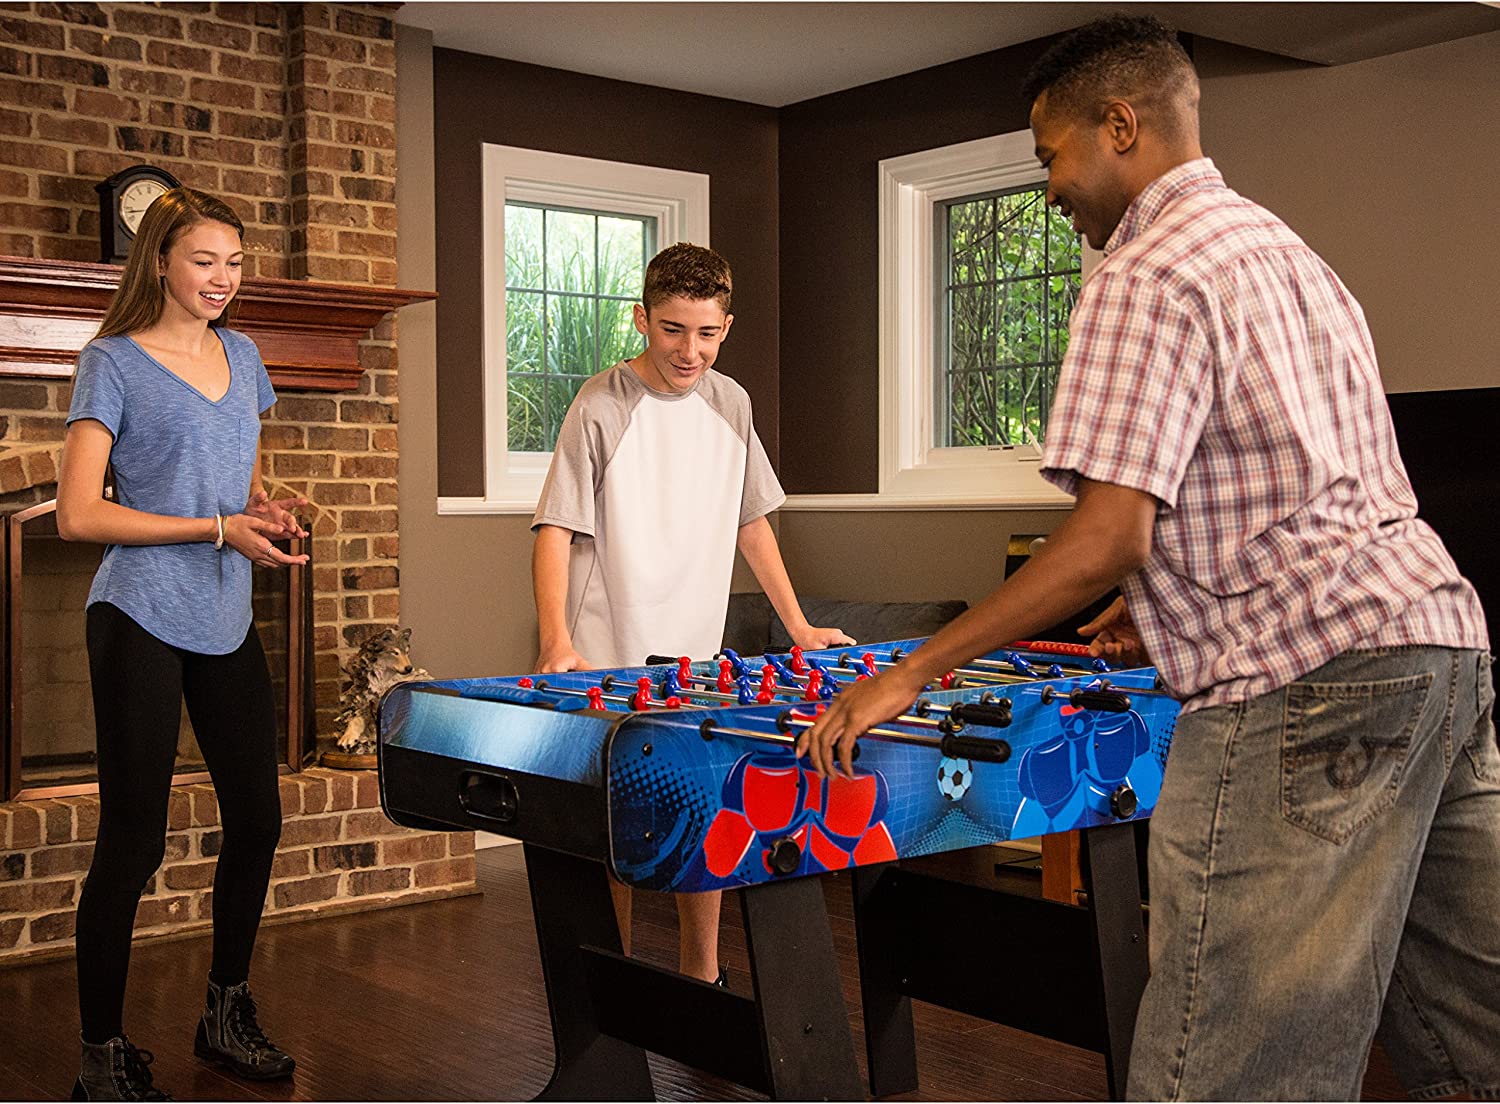 Hathaway Gladiator 48&#34; Folding Foosball Table, Arcade Table Soccer for Game Rooms, Includes Foosballs, Blue/Black